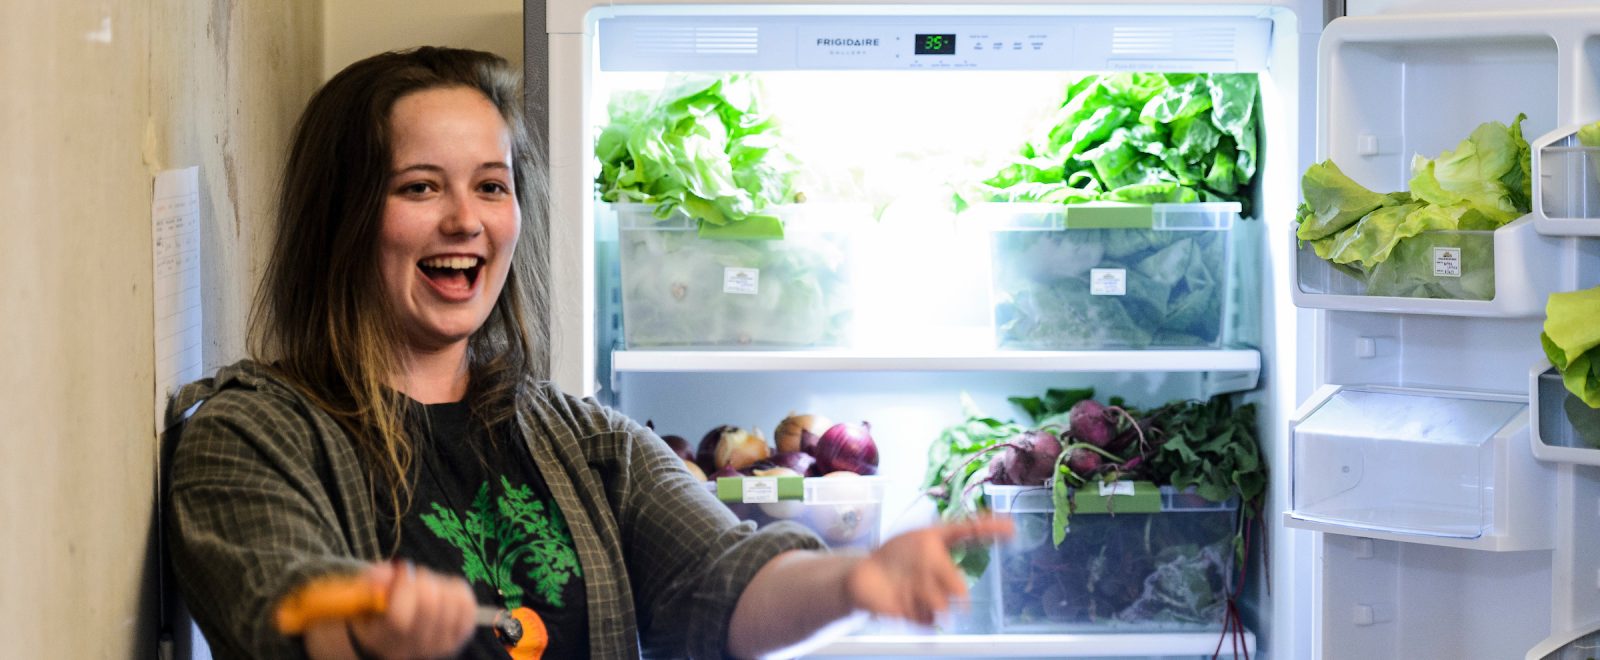 Hannah DePorter stands in front of the new refrigerator, door open displaying a bounty of fresh greens, onions, beets.